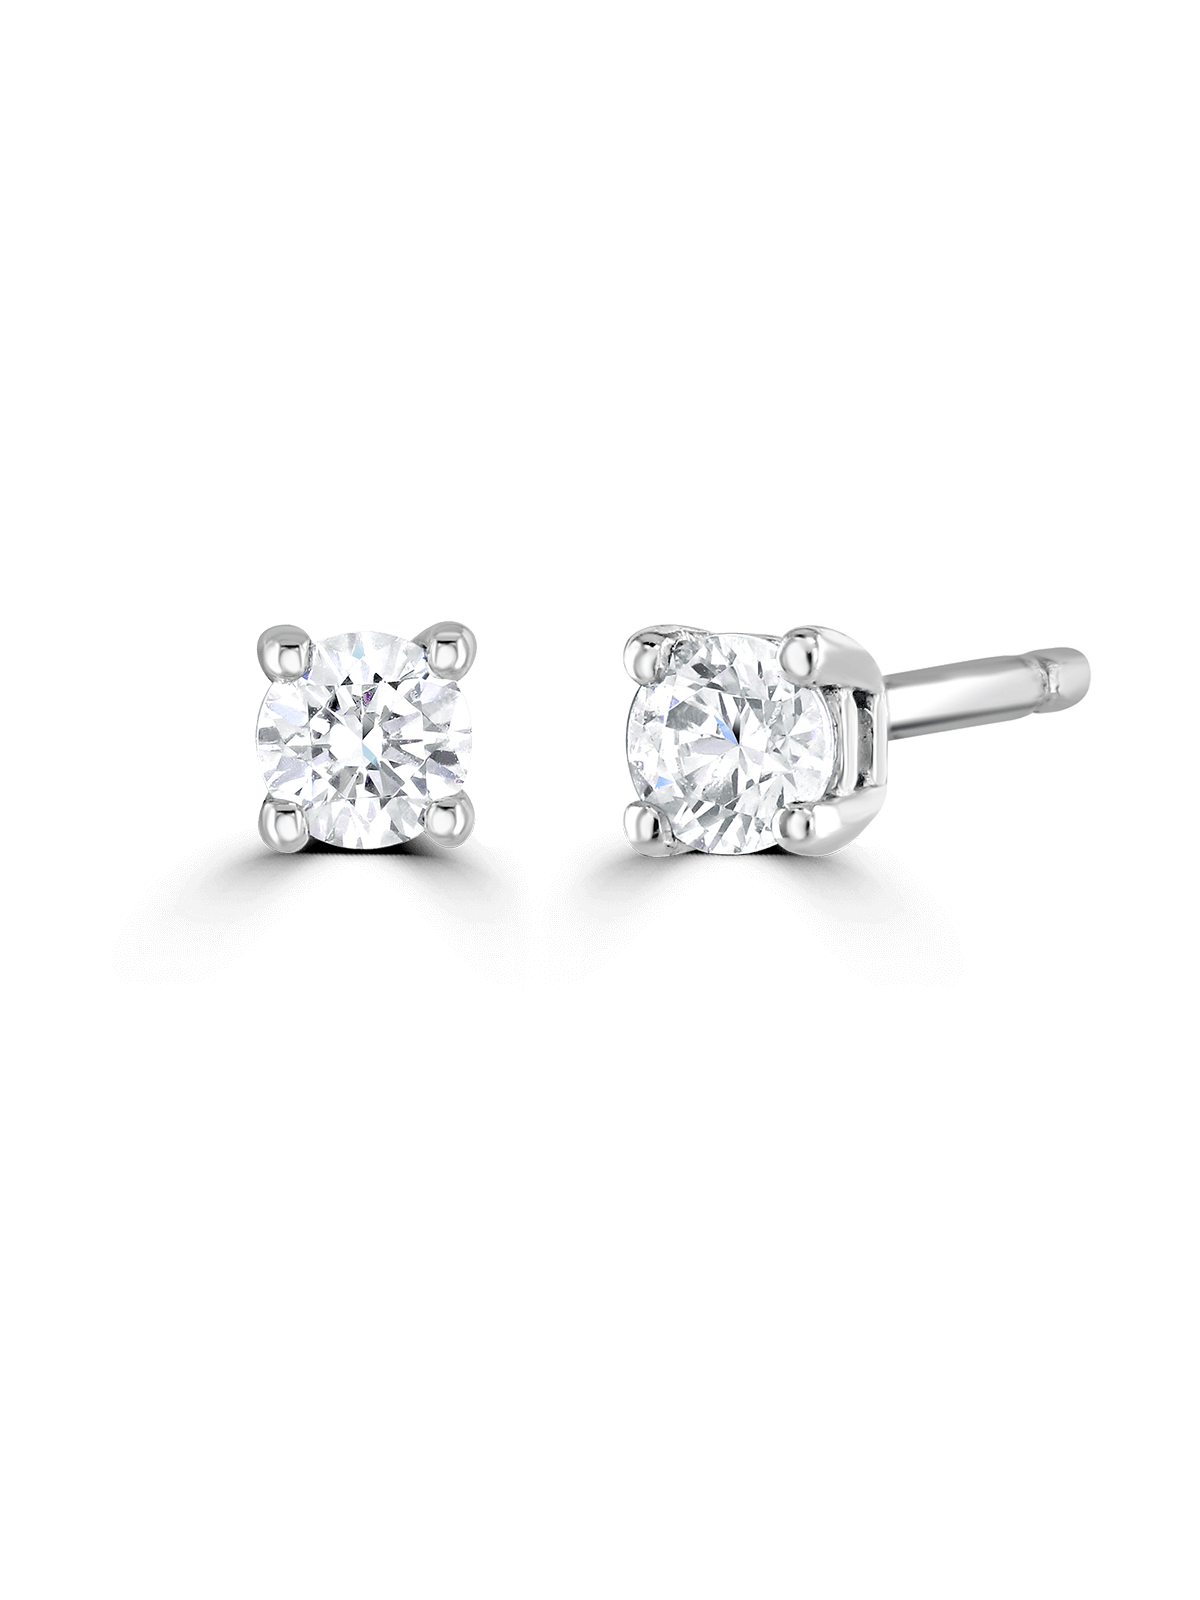 Brown & Newirth Rosie 0.15ct Brilliant Cut Diamond Solitaire Earrings in 9ct White Gold